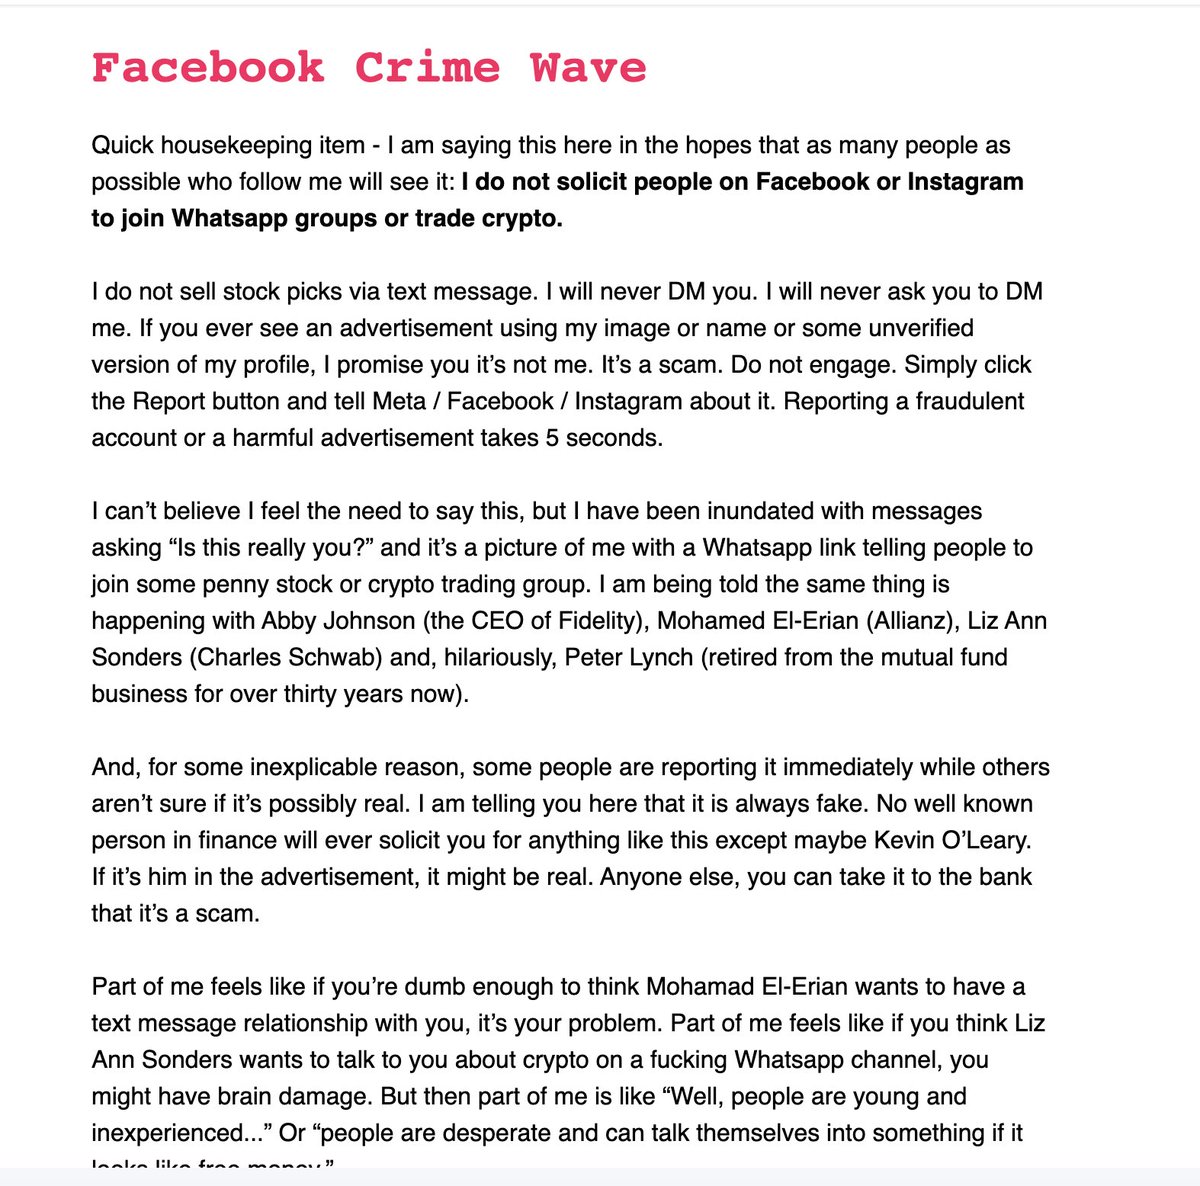 The Facebook Crime Wave ... Like Josh I am inundated with people asking 'is this really you' after being solicited crypto/trading products I NEVER DM anyone ever here or Instagram/Faceplant as josh says only @kevinolearytv or maybe @chamath would do this